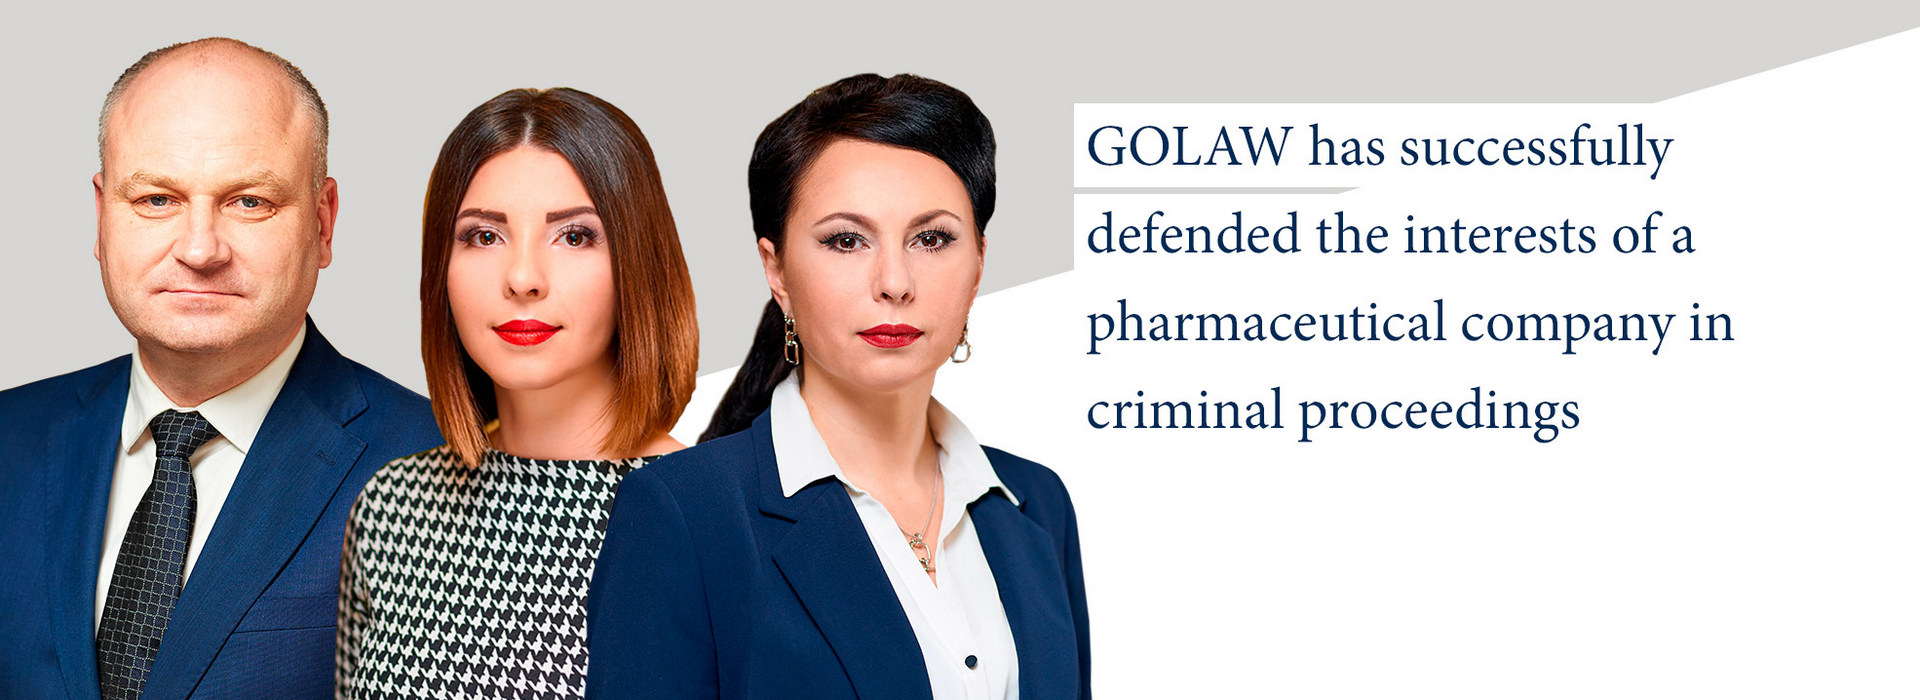 GOLAW Has Successfully Defended the Interests of a Pharmaceutical Company in Criminal Proceedings